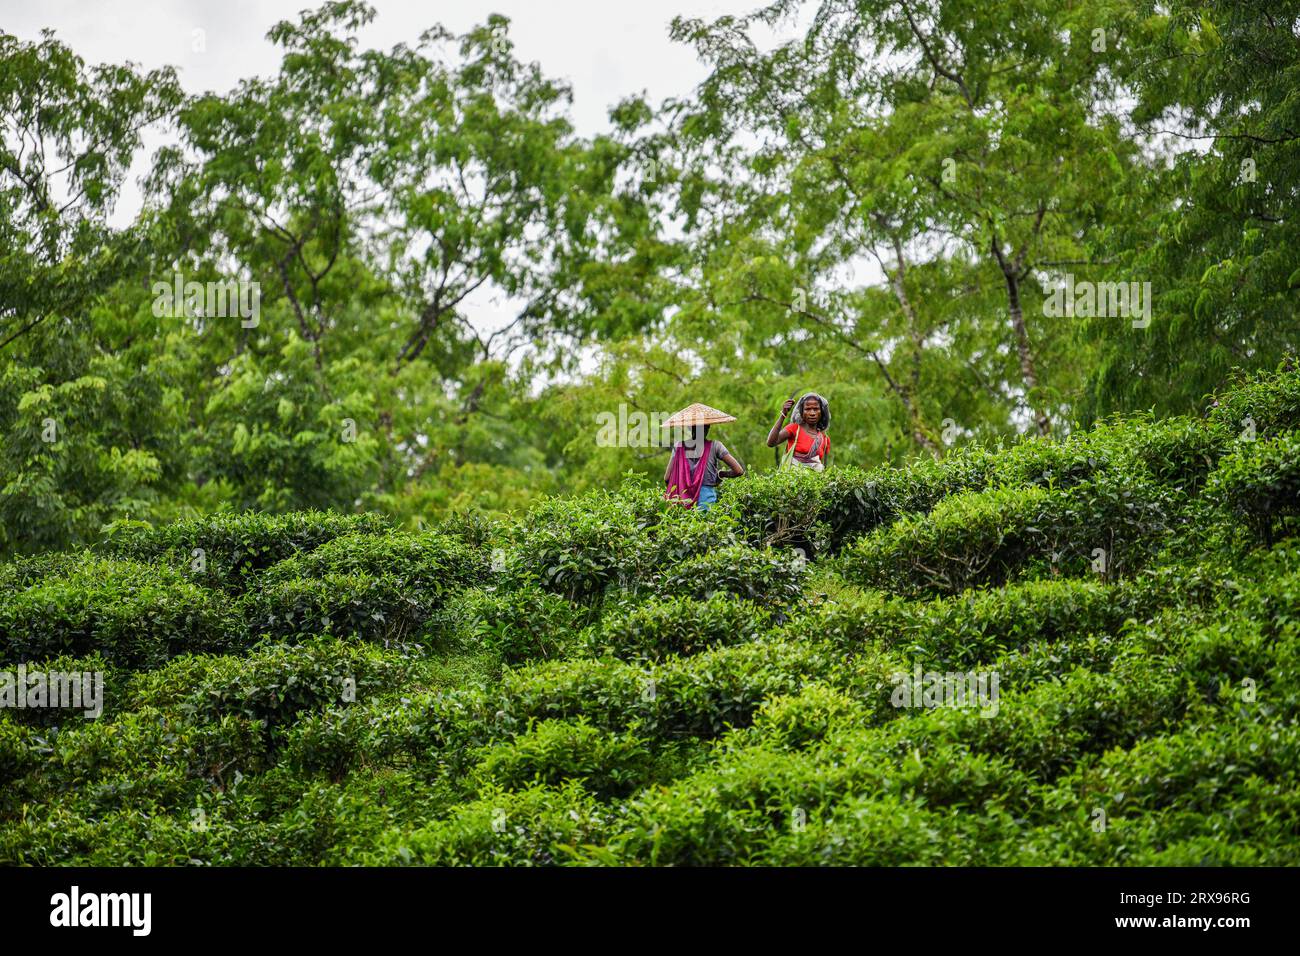 Bangladeshi woman plucking tea leaves at a tea garden in Sylhet. Tea Plucking is a specialized skill. Two leaves and a bud need to be plucked in order to get the best taste and profitability. The calculation of daily wage is 170tk(1.60$) for plucking at least 22-23 kg leaves per day for a worker. The area of Sylhet has over 150 gardens including three of the largest tea gardens in the world both in area and production. Nearly 300,000 workers are employed on the tea estates of which over 75% are women but they are passing their lives as a slave. Stock Photo